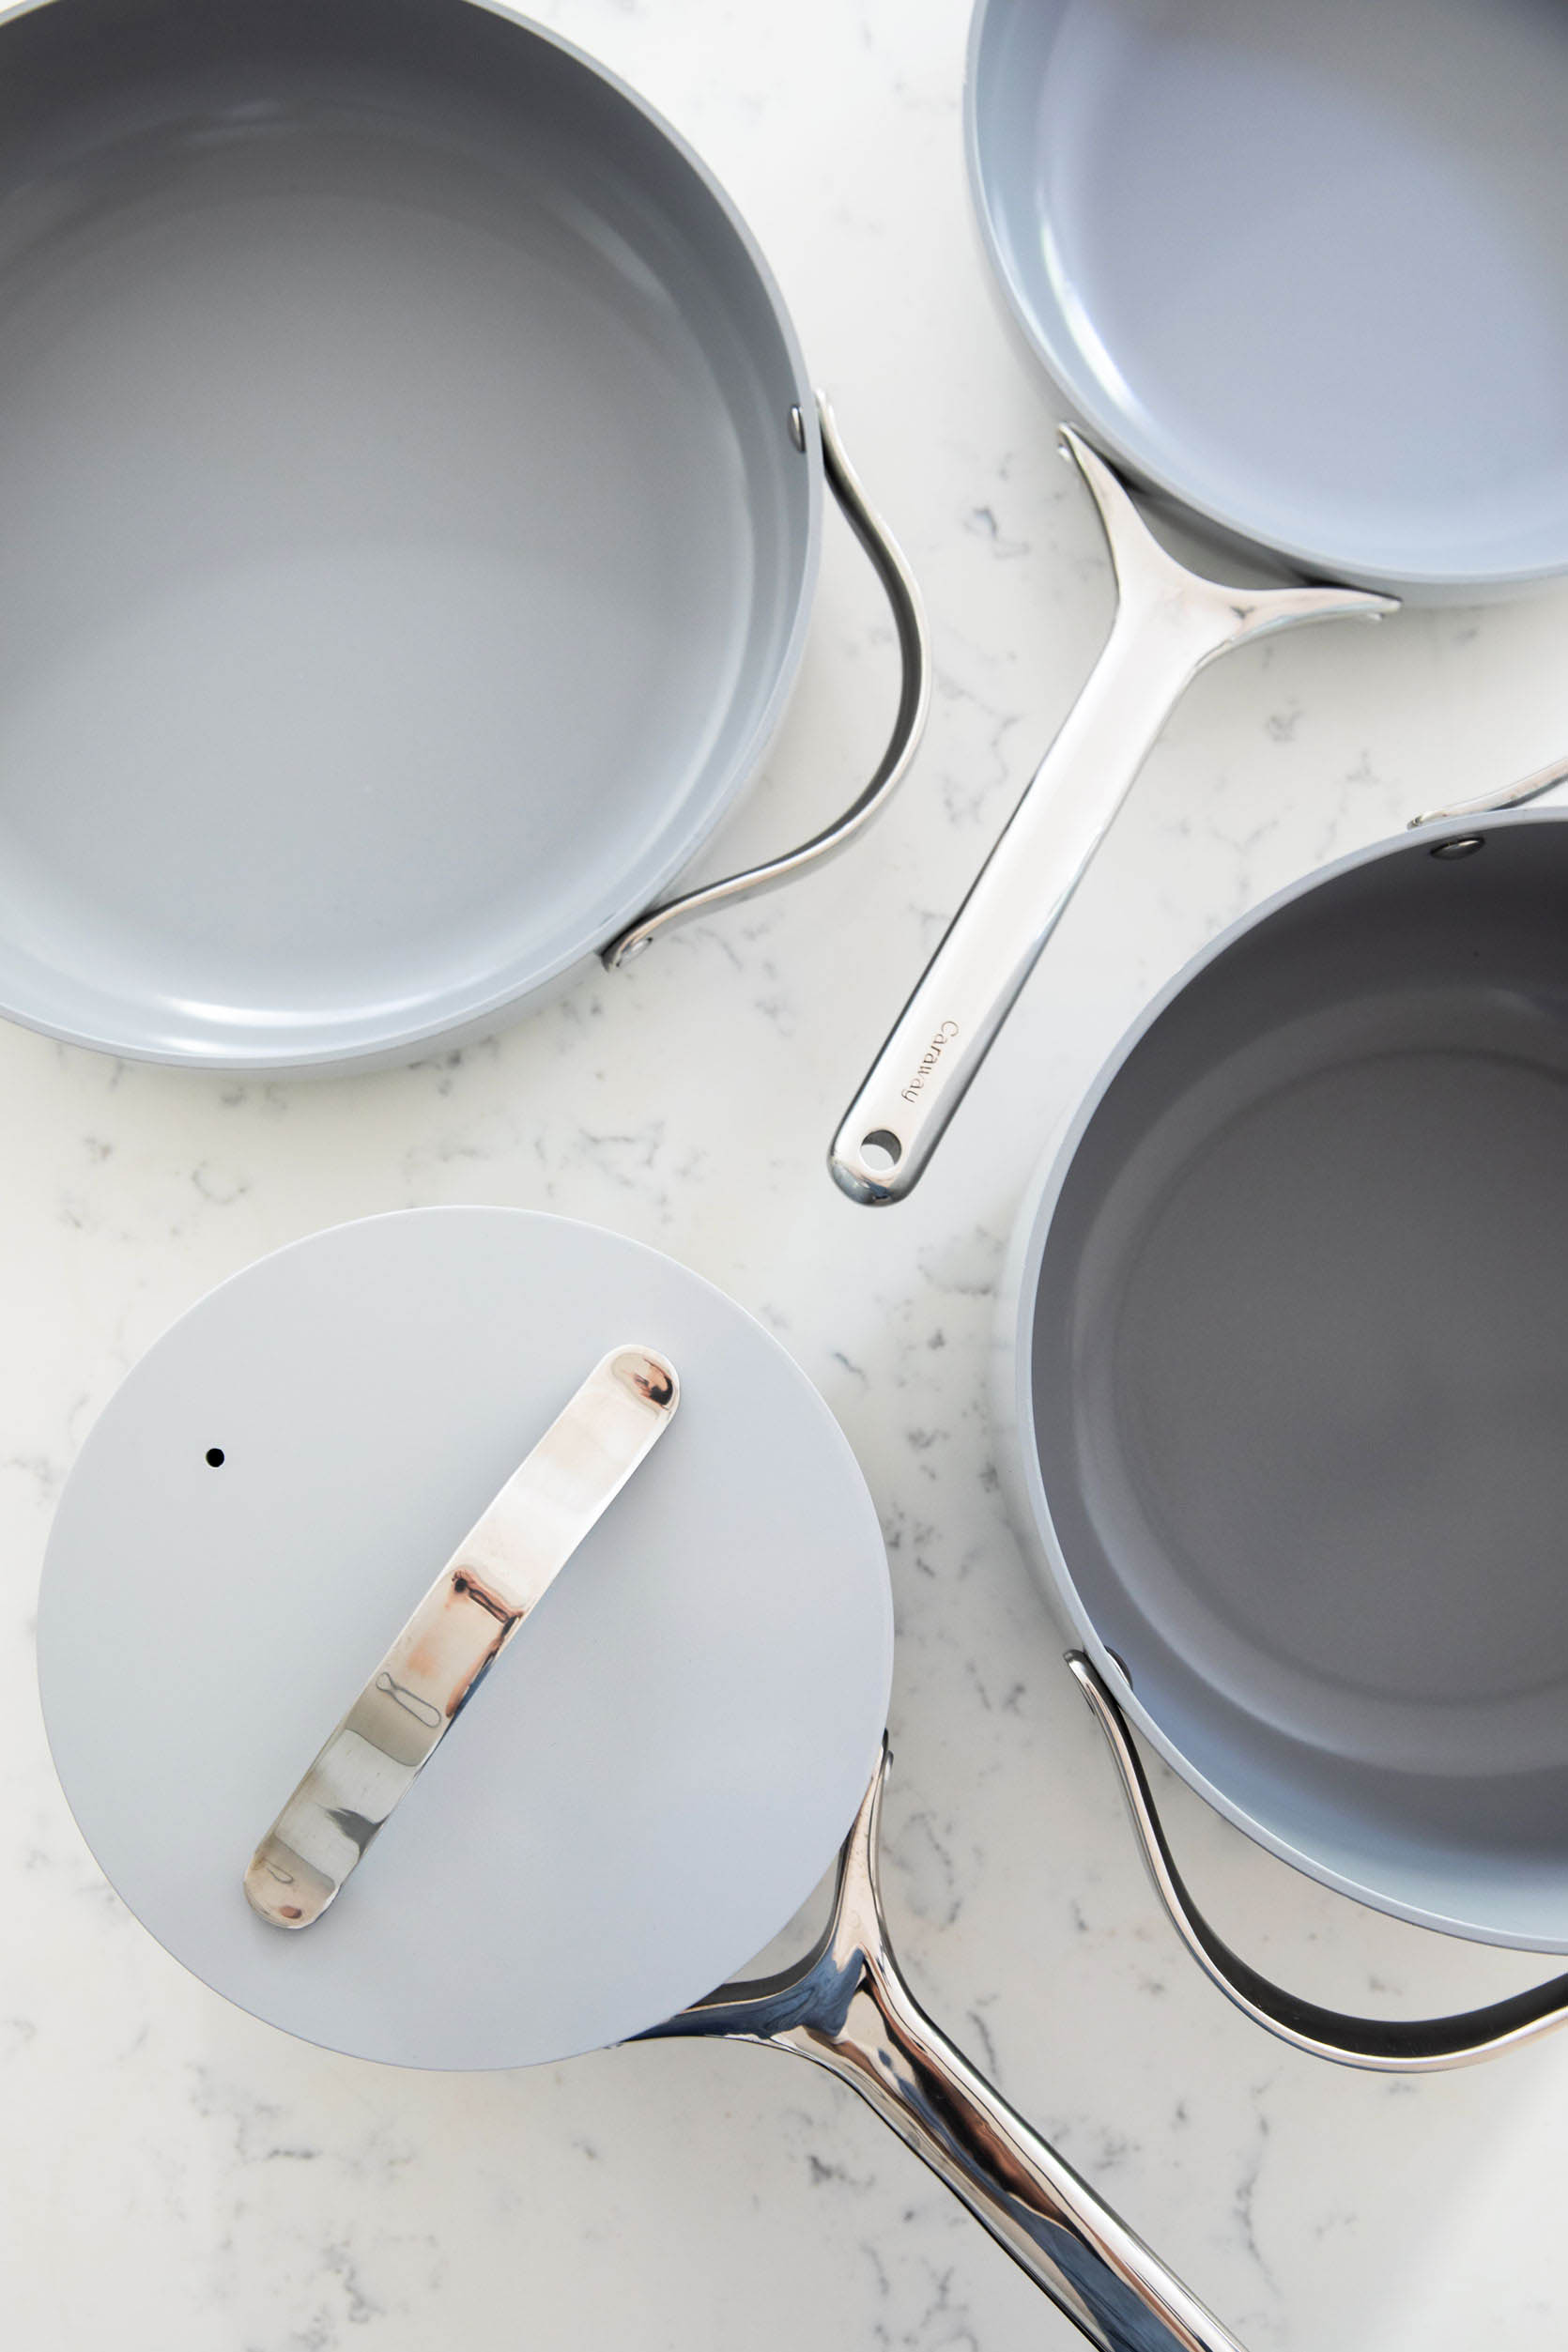 Caraway Cookware Review: Pros & Cons of Ceramic Pots & Pans